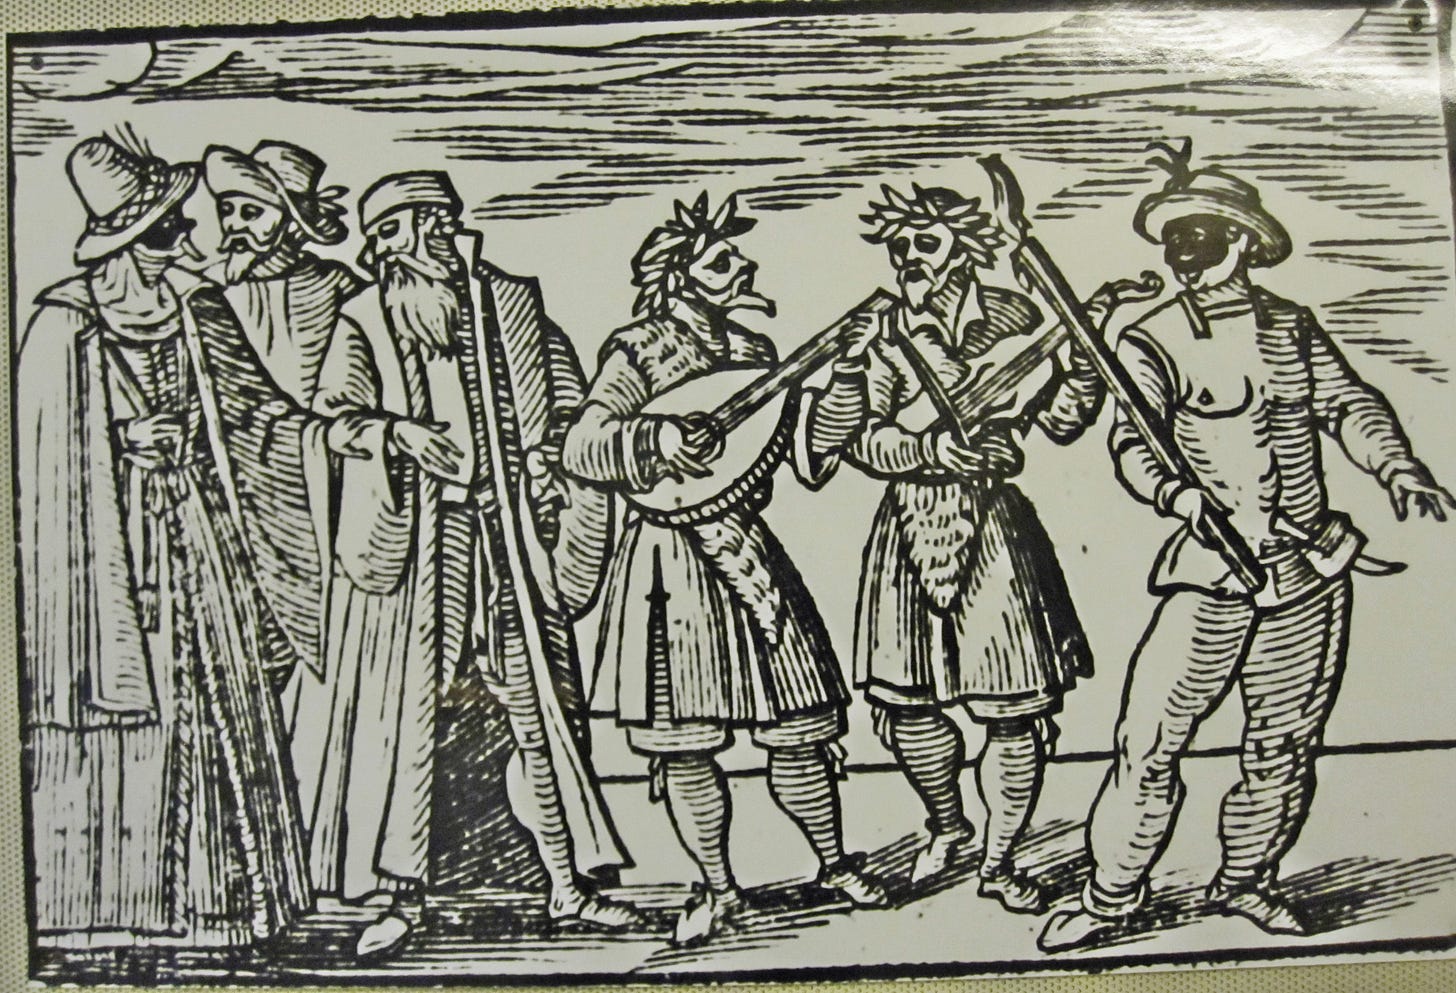 A woodcut illustration showing people in varied costume, celebrating the Jewish festival of Purim. The picture seems to show only men although all genders take part of the pageantry.